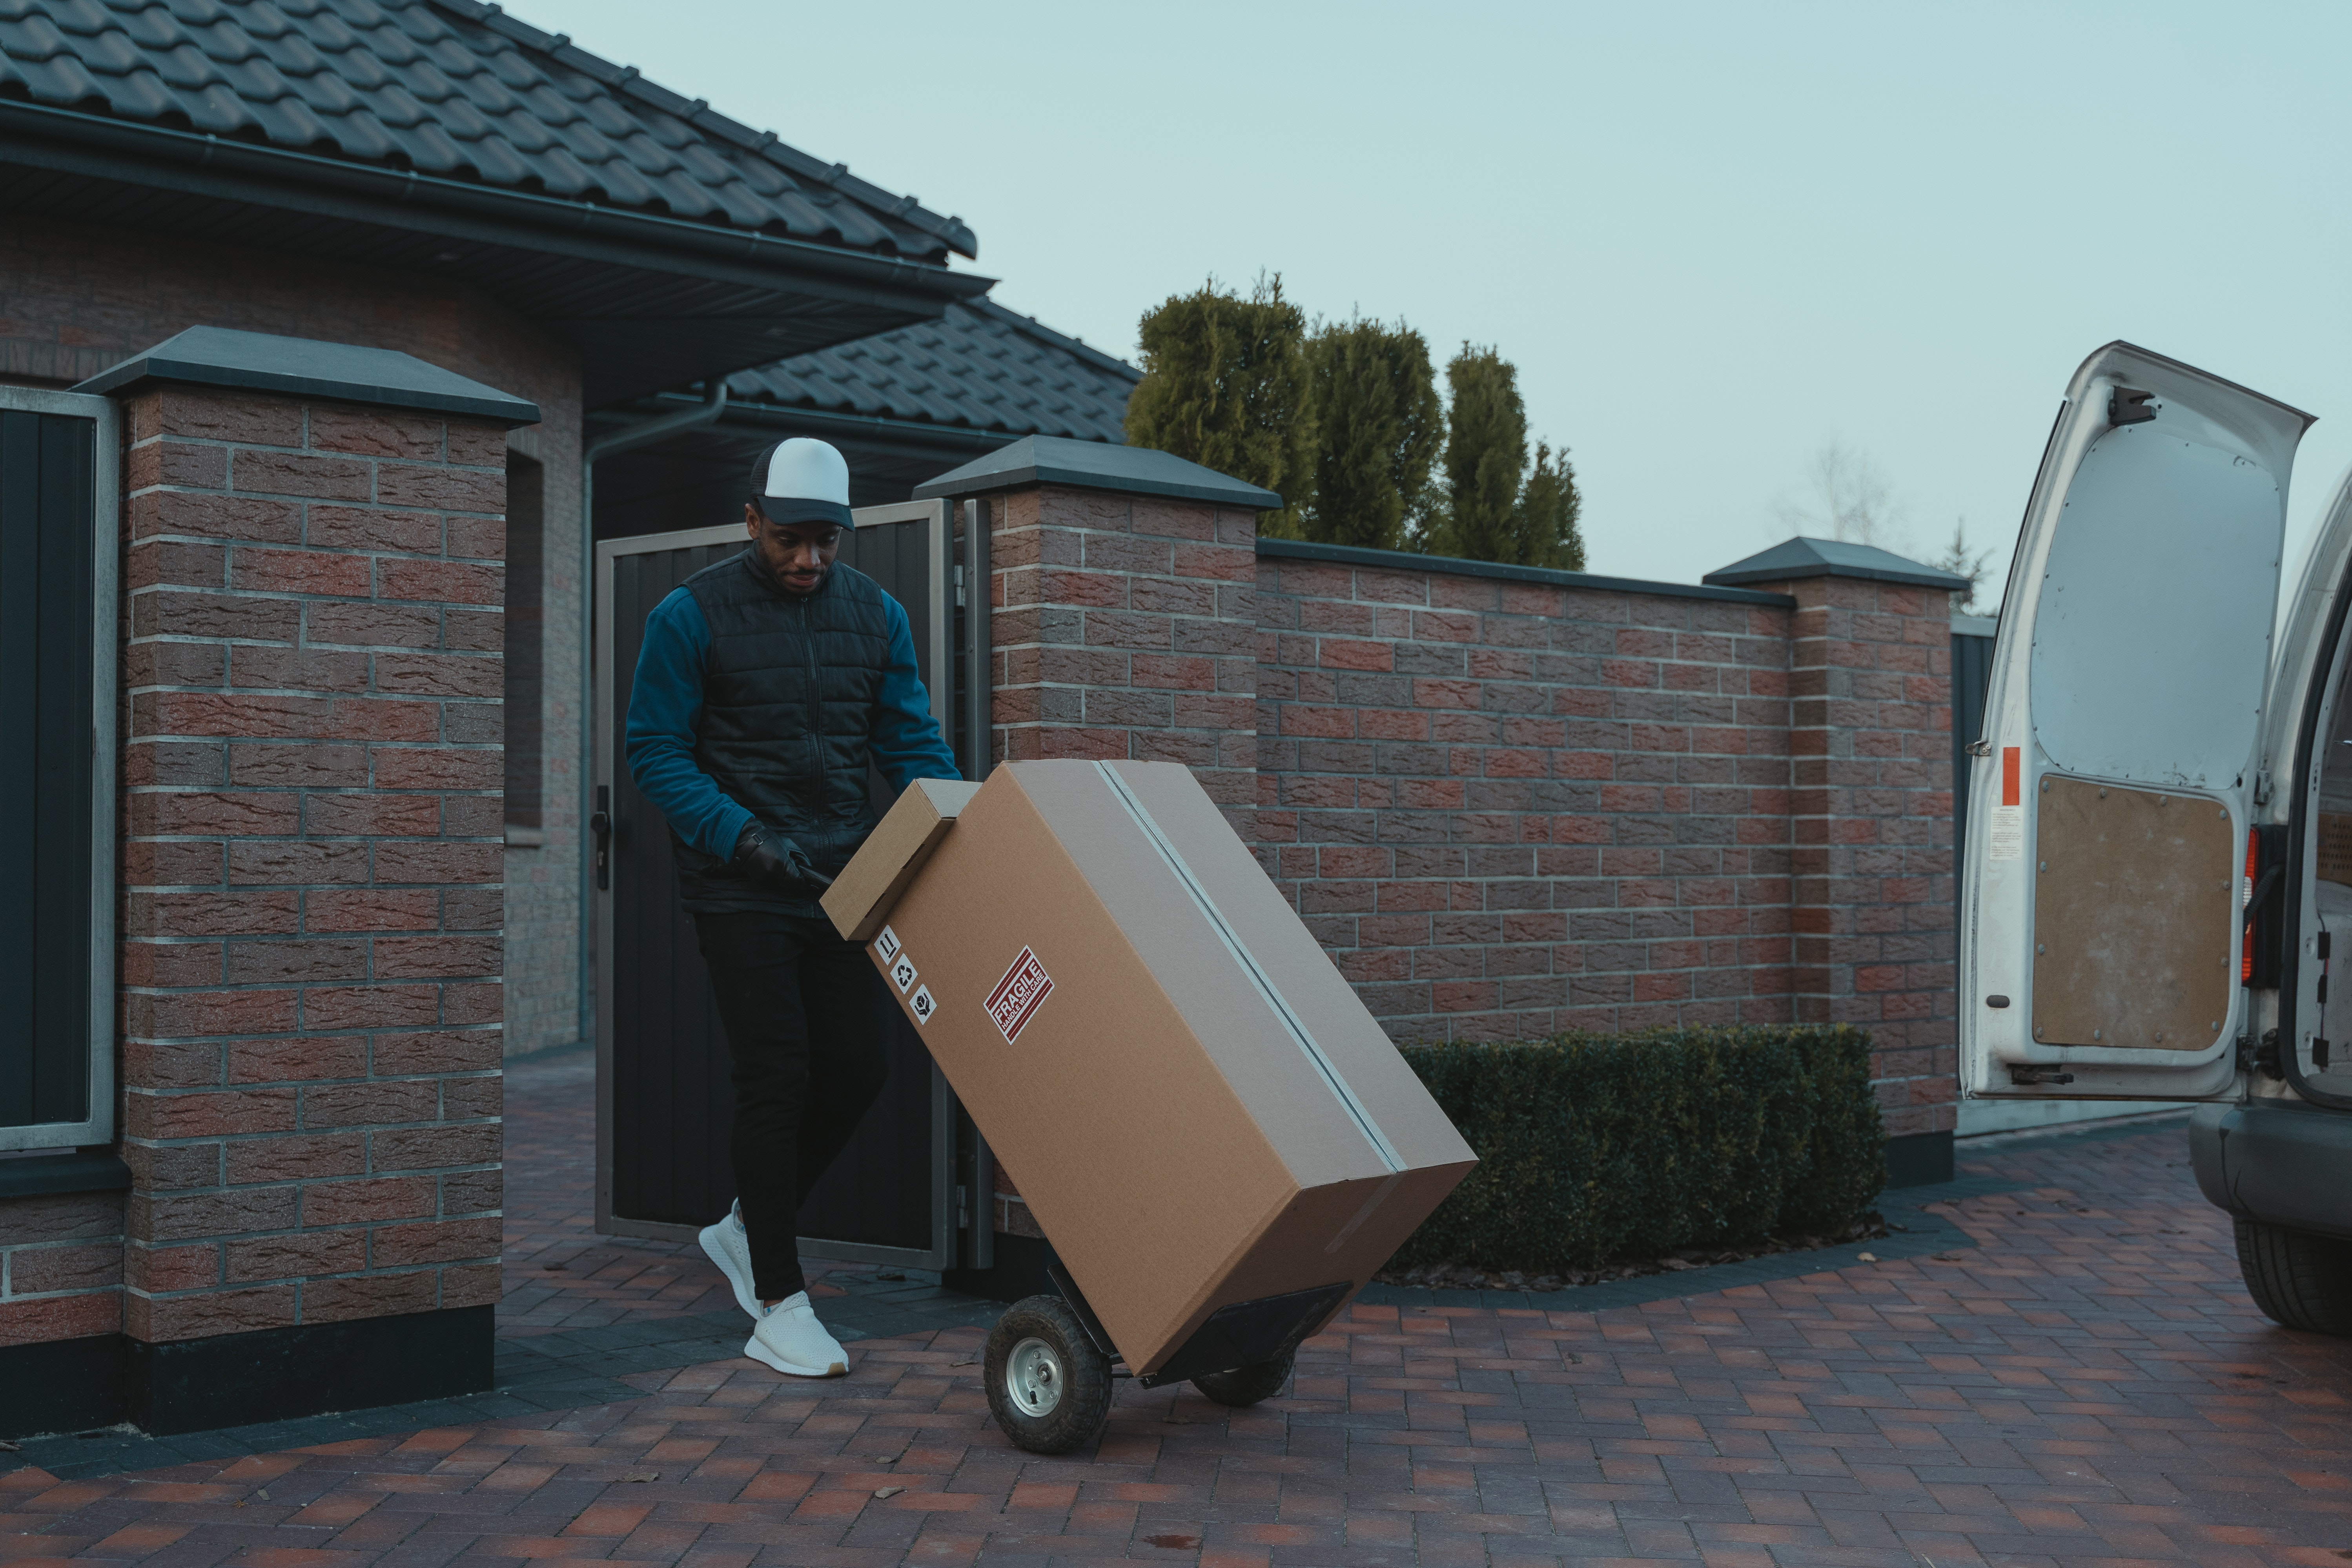 A delivery guy unloading a package from a light commercial vehicle to make a delivery at a residential address.